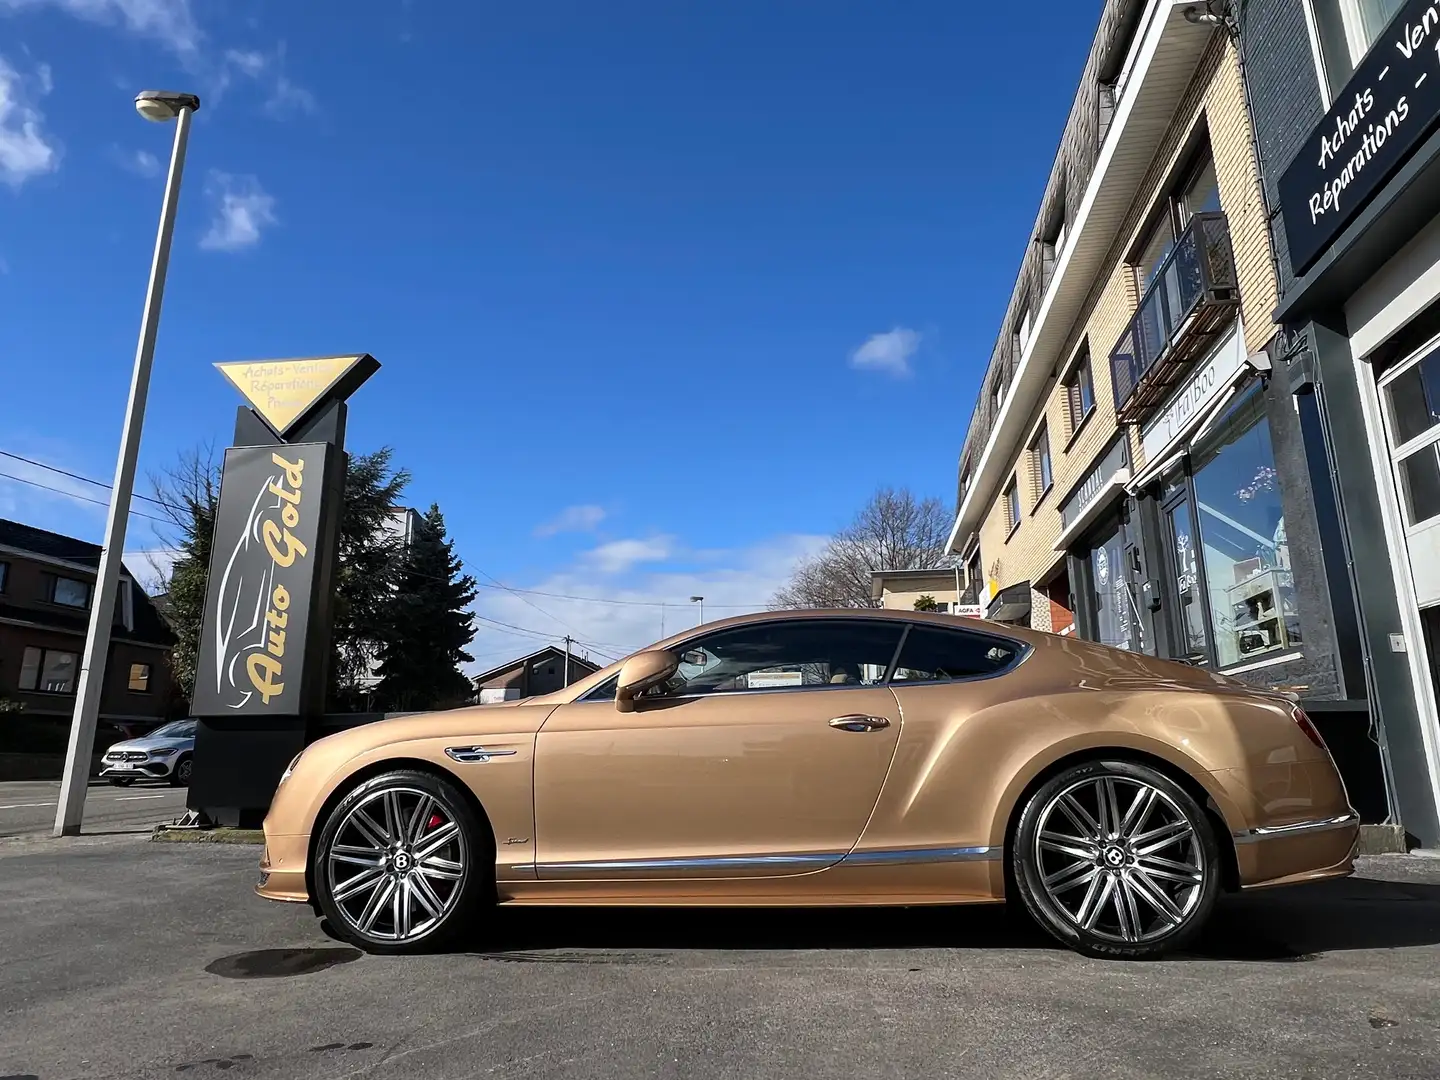 Bentley Continental GT SPEED GOLD 1 OF 21 LIMITED 1PROP FULL 💛 Gold - 1